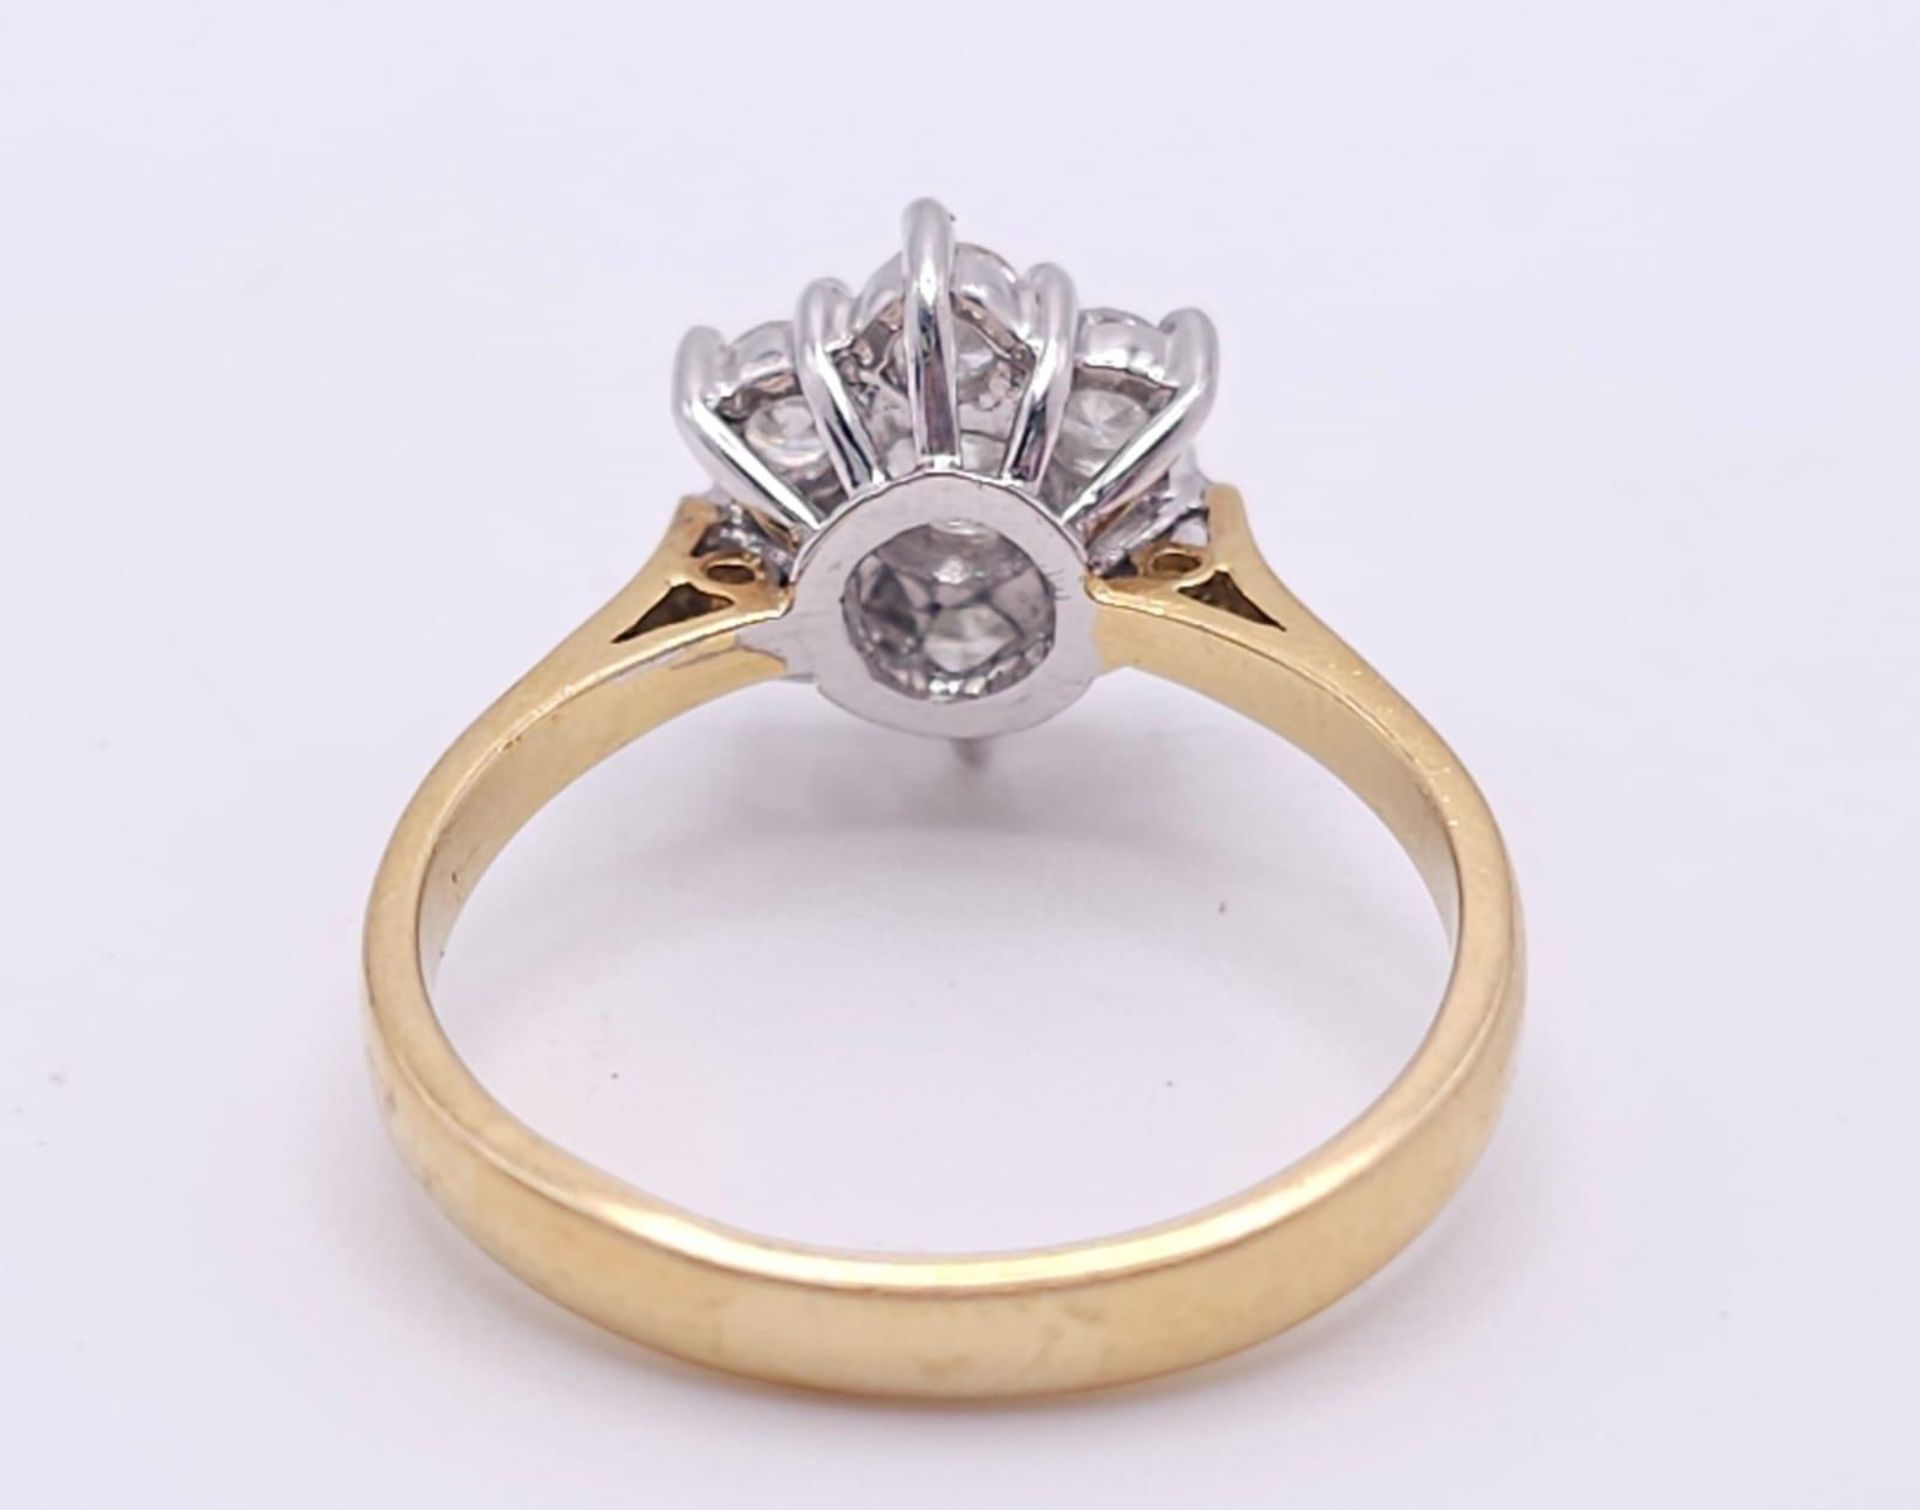 18K YELLOW GOLD DIAMOND CLUSTER RING WITH APPROX 1.05CT DIAMONDS IN FLORAL DESIGN, WEIGHT 4.6G - Image 5 of 7